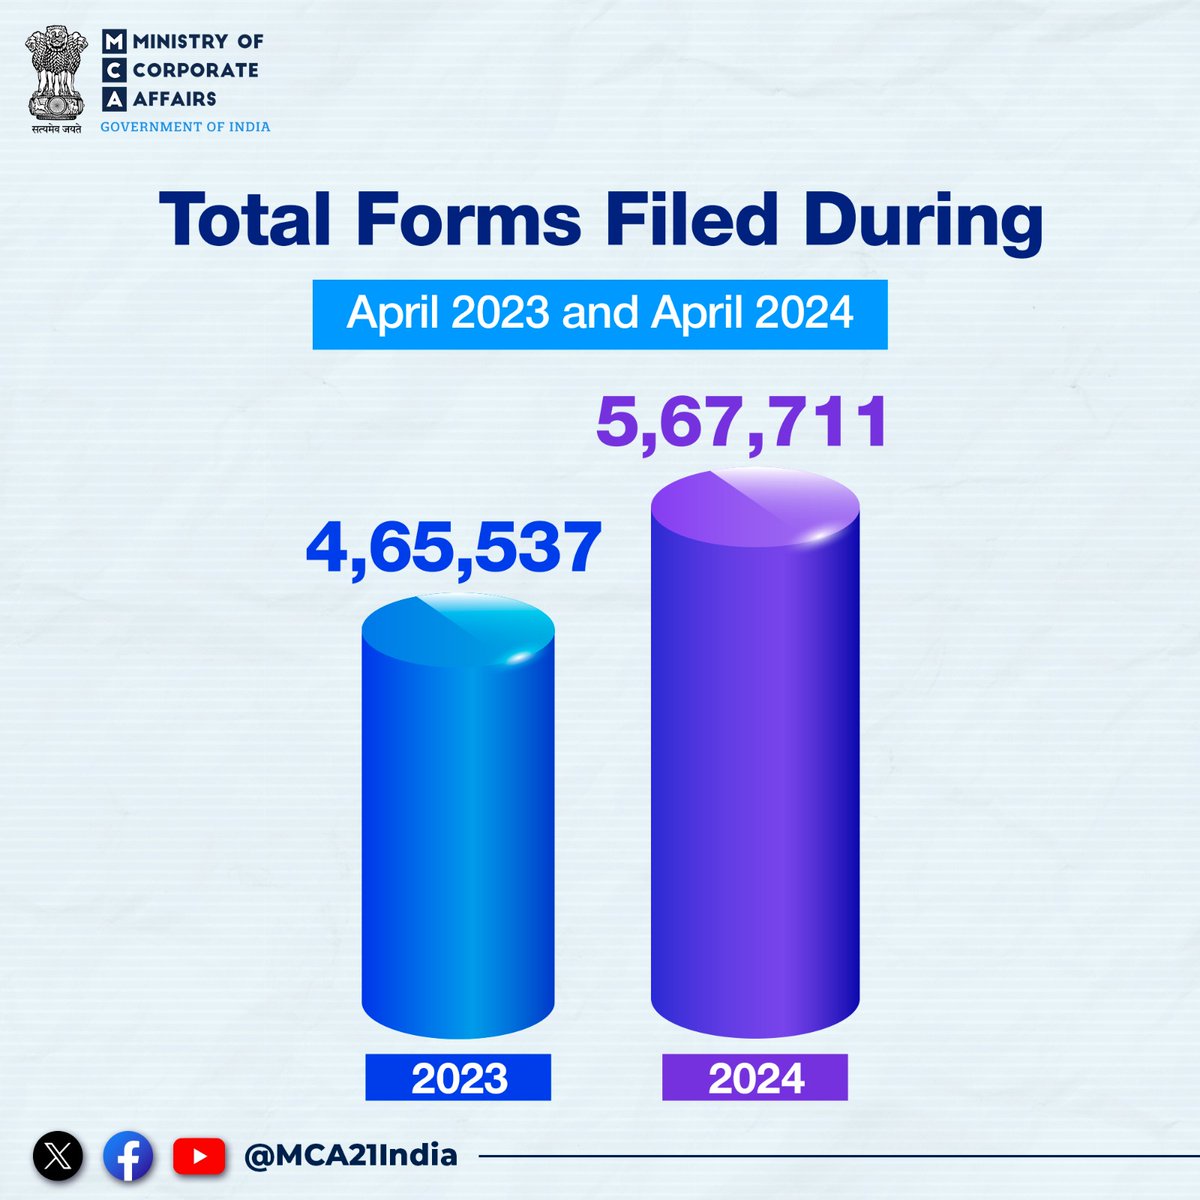 Stakeholders are informed that 5,67,711 forms have been filed during April 2024, compared to 4,65,537 during April 2023. 

#MCA #MCA21 #EaseOfDoingBusiness #Forms #Filing